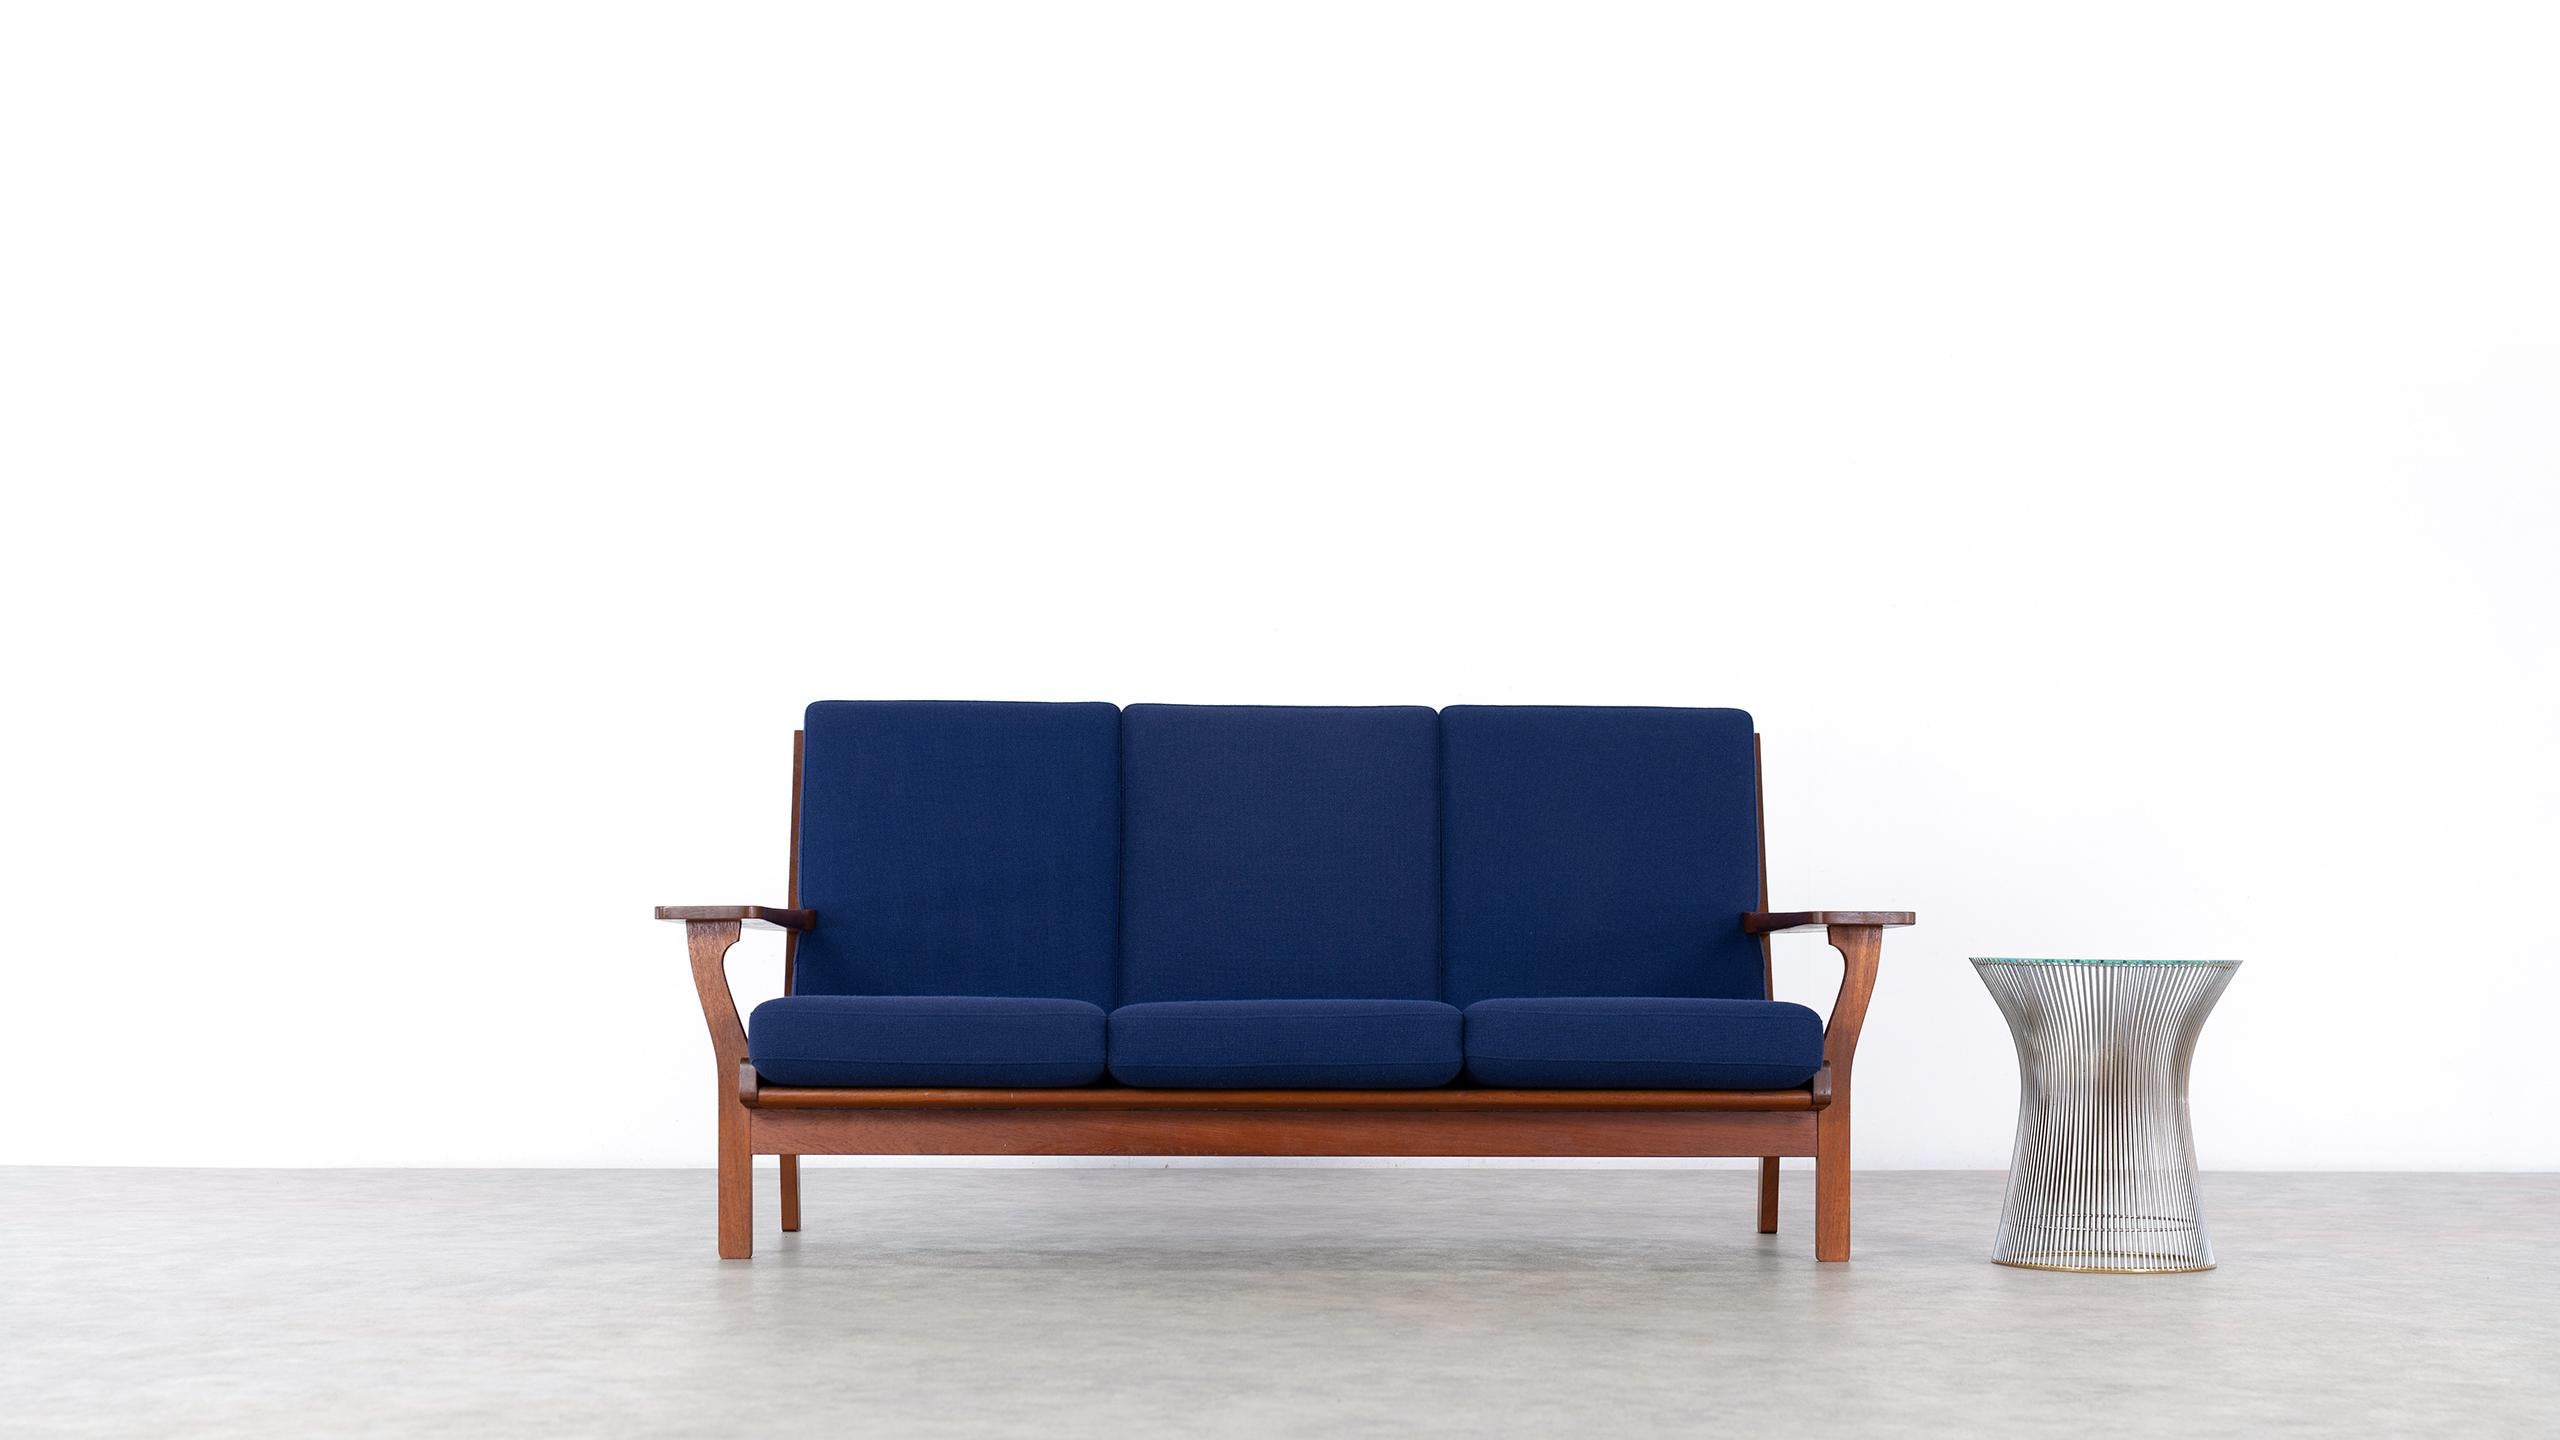 Here you have the opportunity to purchase an extremely rare 3seater sofa by Hans J. Wegner, designed in 1956 for GETAMA in Denmark. 
The stamped and handcrafted frame is made of teak.

GETAMA still produces many of Wegner's designs today, but not